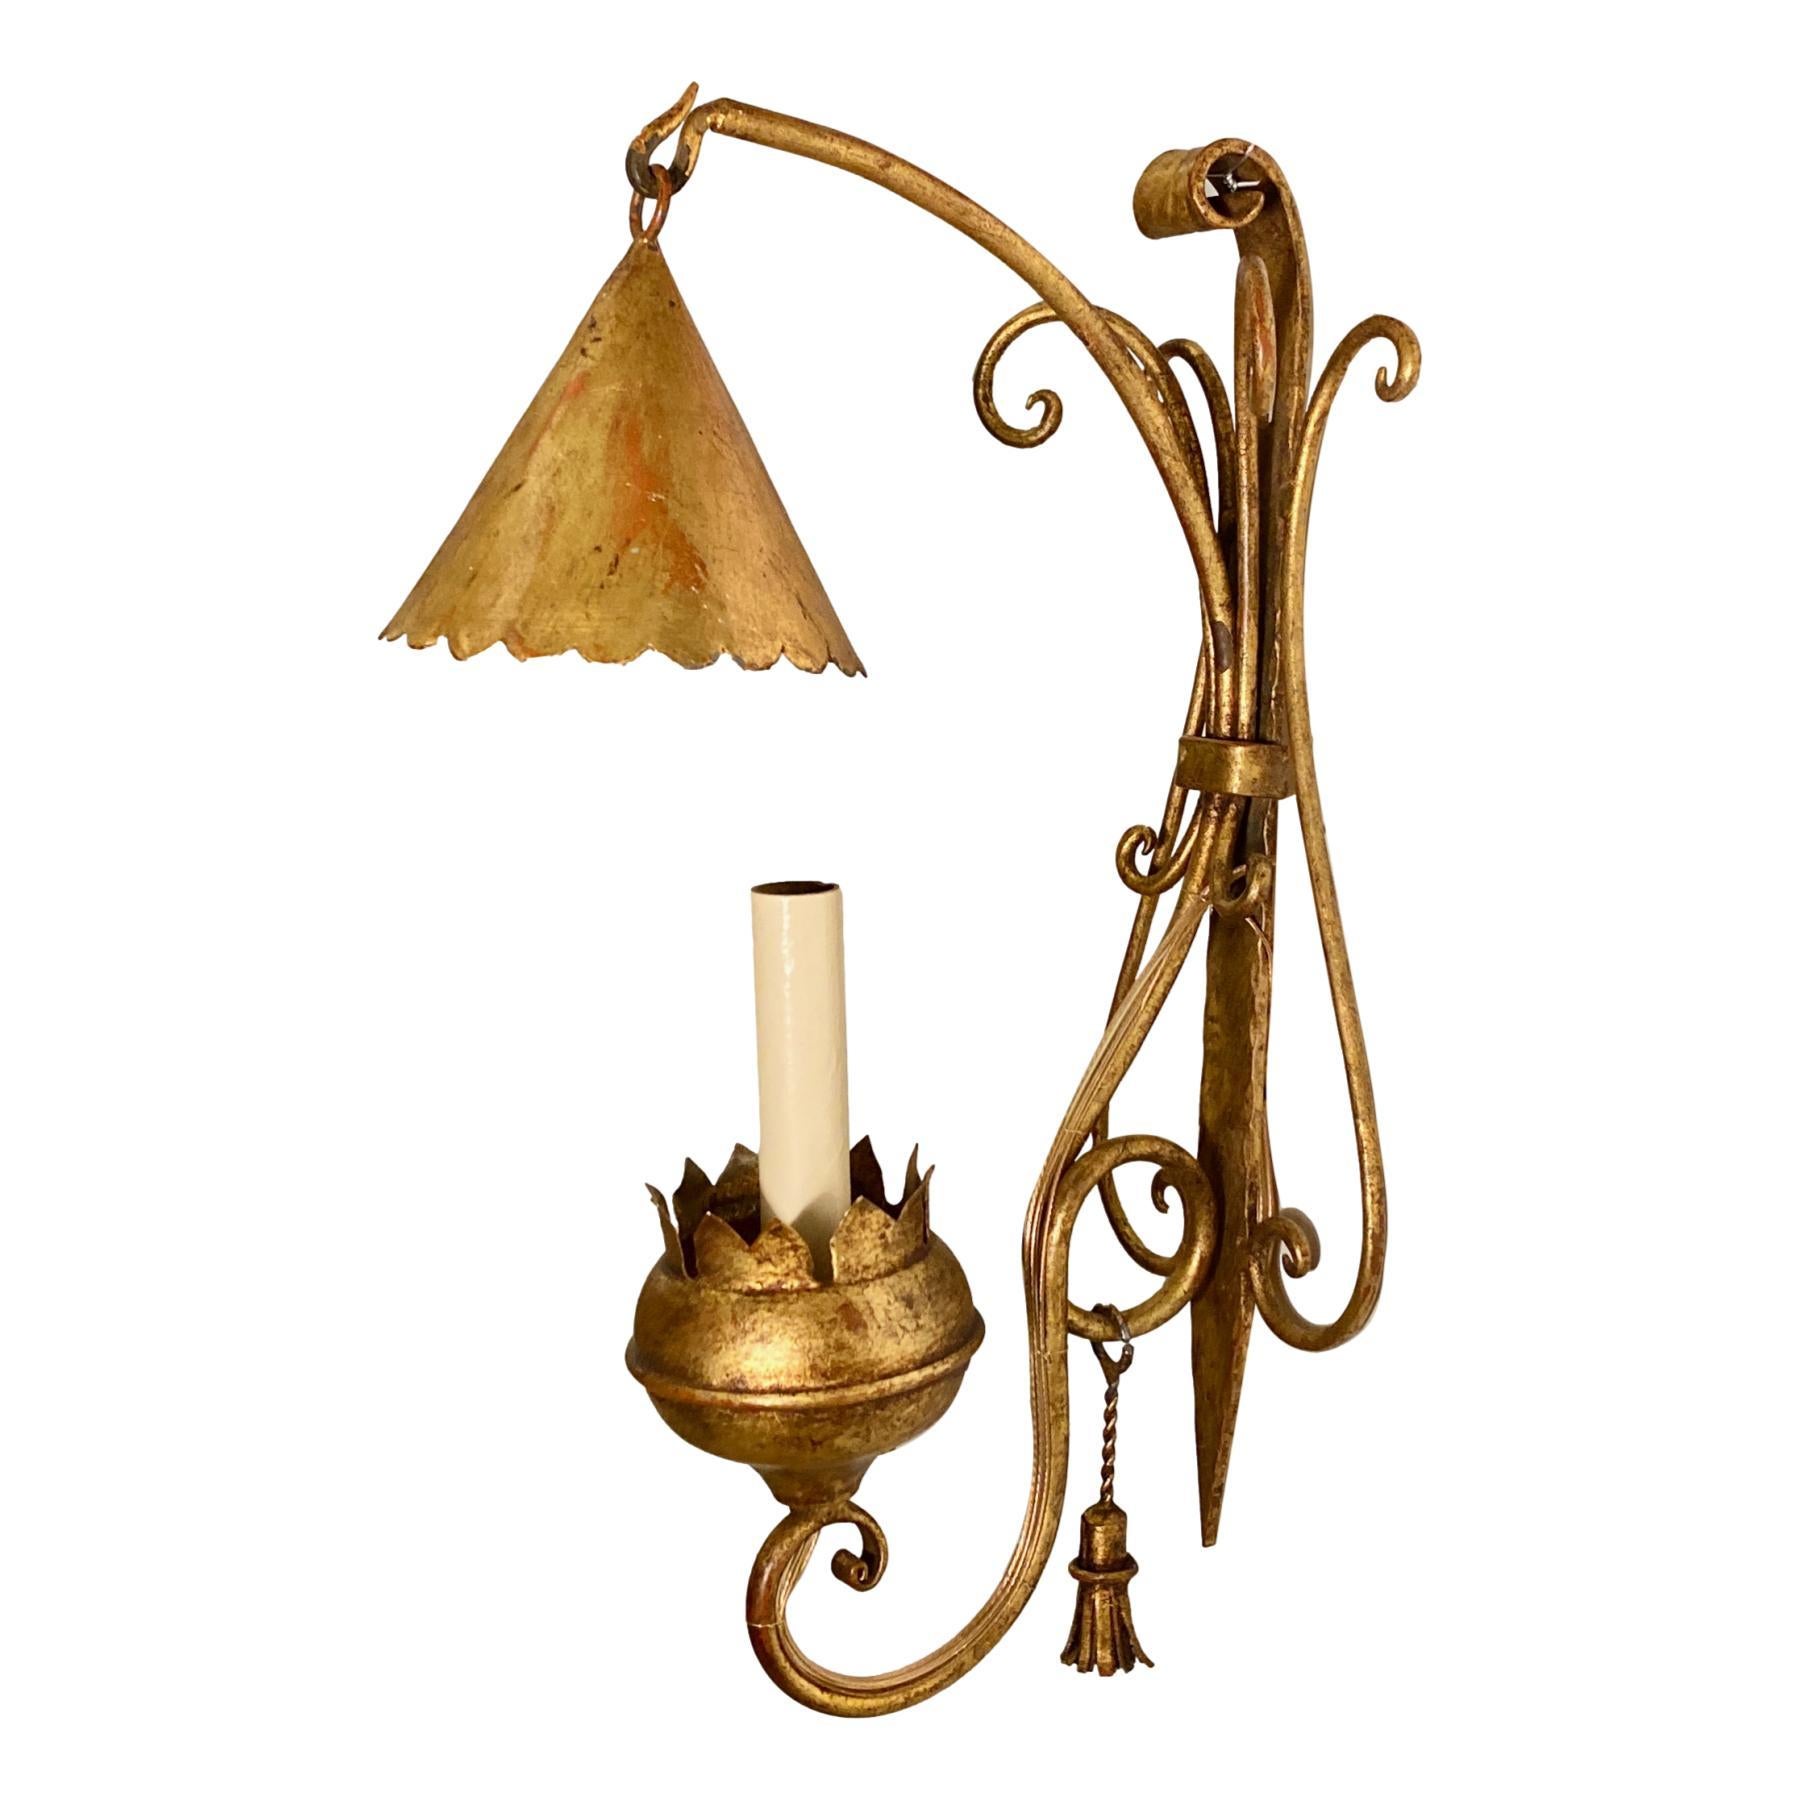 A set of six circa 1940's single light Italian gilt metal sconces with smoke bells and tassels. Sold in pairs.

Measurements:
Height: 16